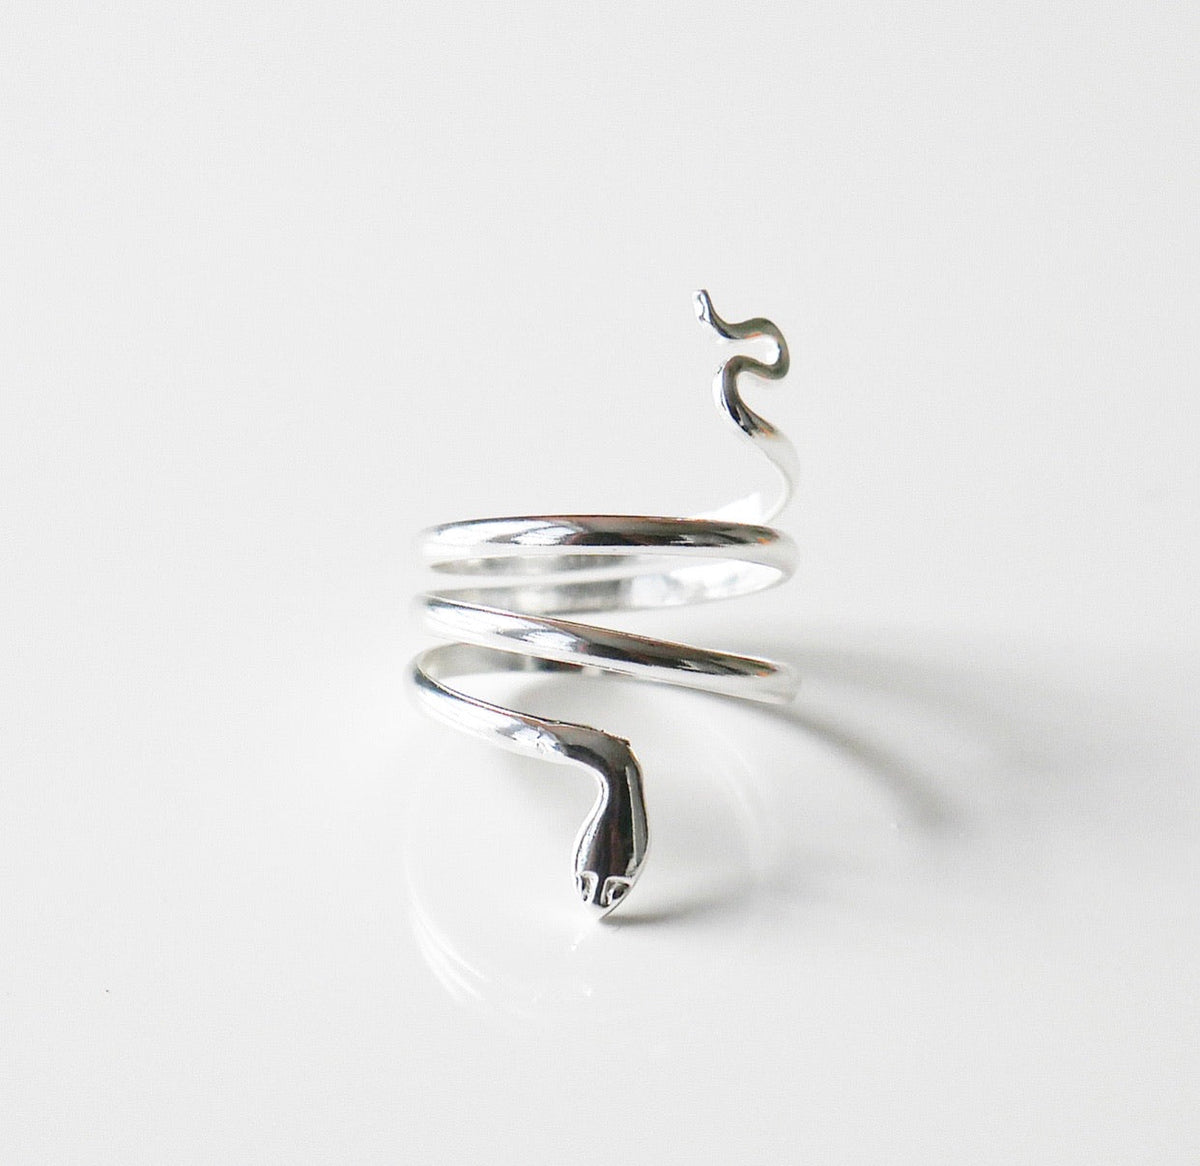 rings, silver ring, snake rings, 925 sterling silver rings, snake jewelry, statement rings, adjustable rings, white gold rings, snake jewelry, fashion jewelry, fashion accessories, waterproof rings, adjustable rings, christmas gifts, birthday gifts, anniversary gifts, cool jewelry, trending rings 